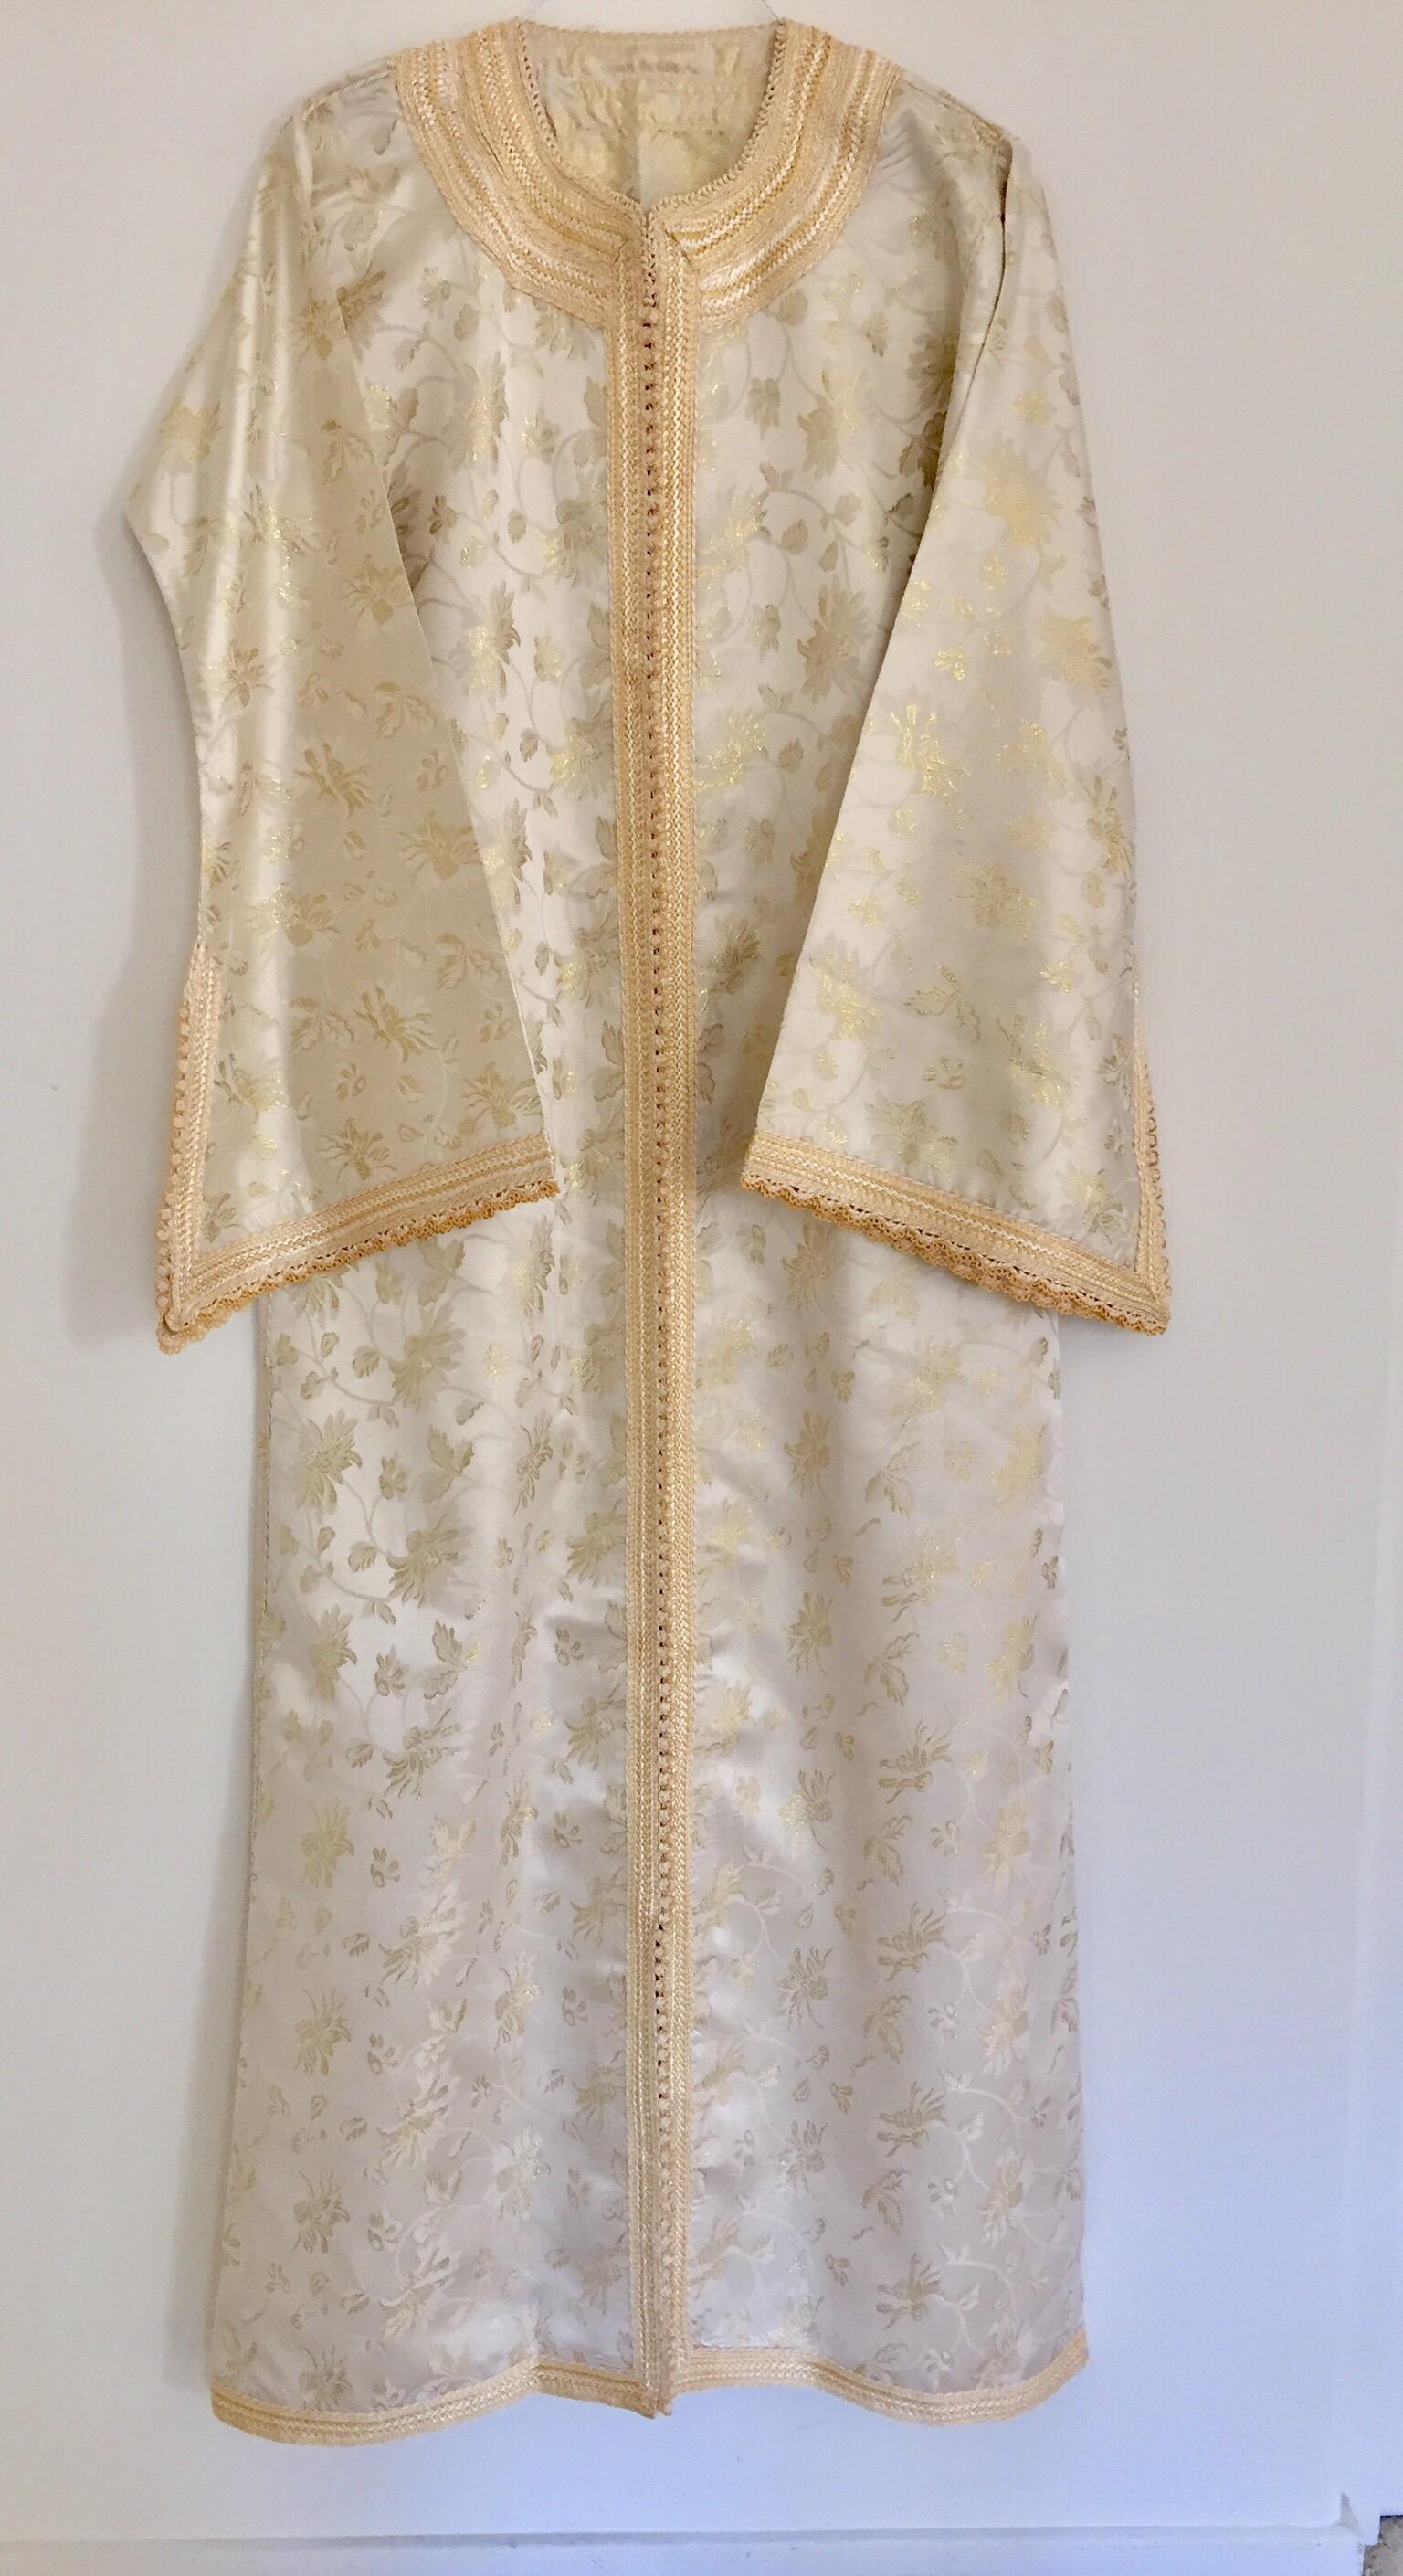 Elegant Moroccan Caftan White and Gold Metallic Floral Brocade For Sale 6